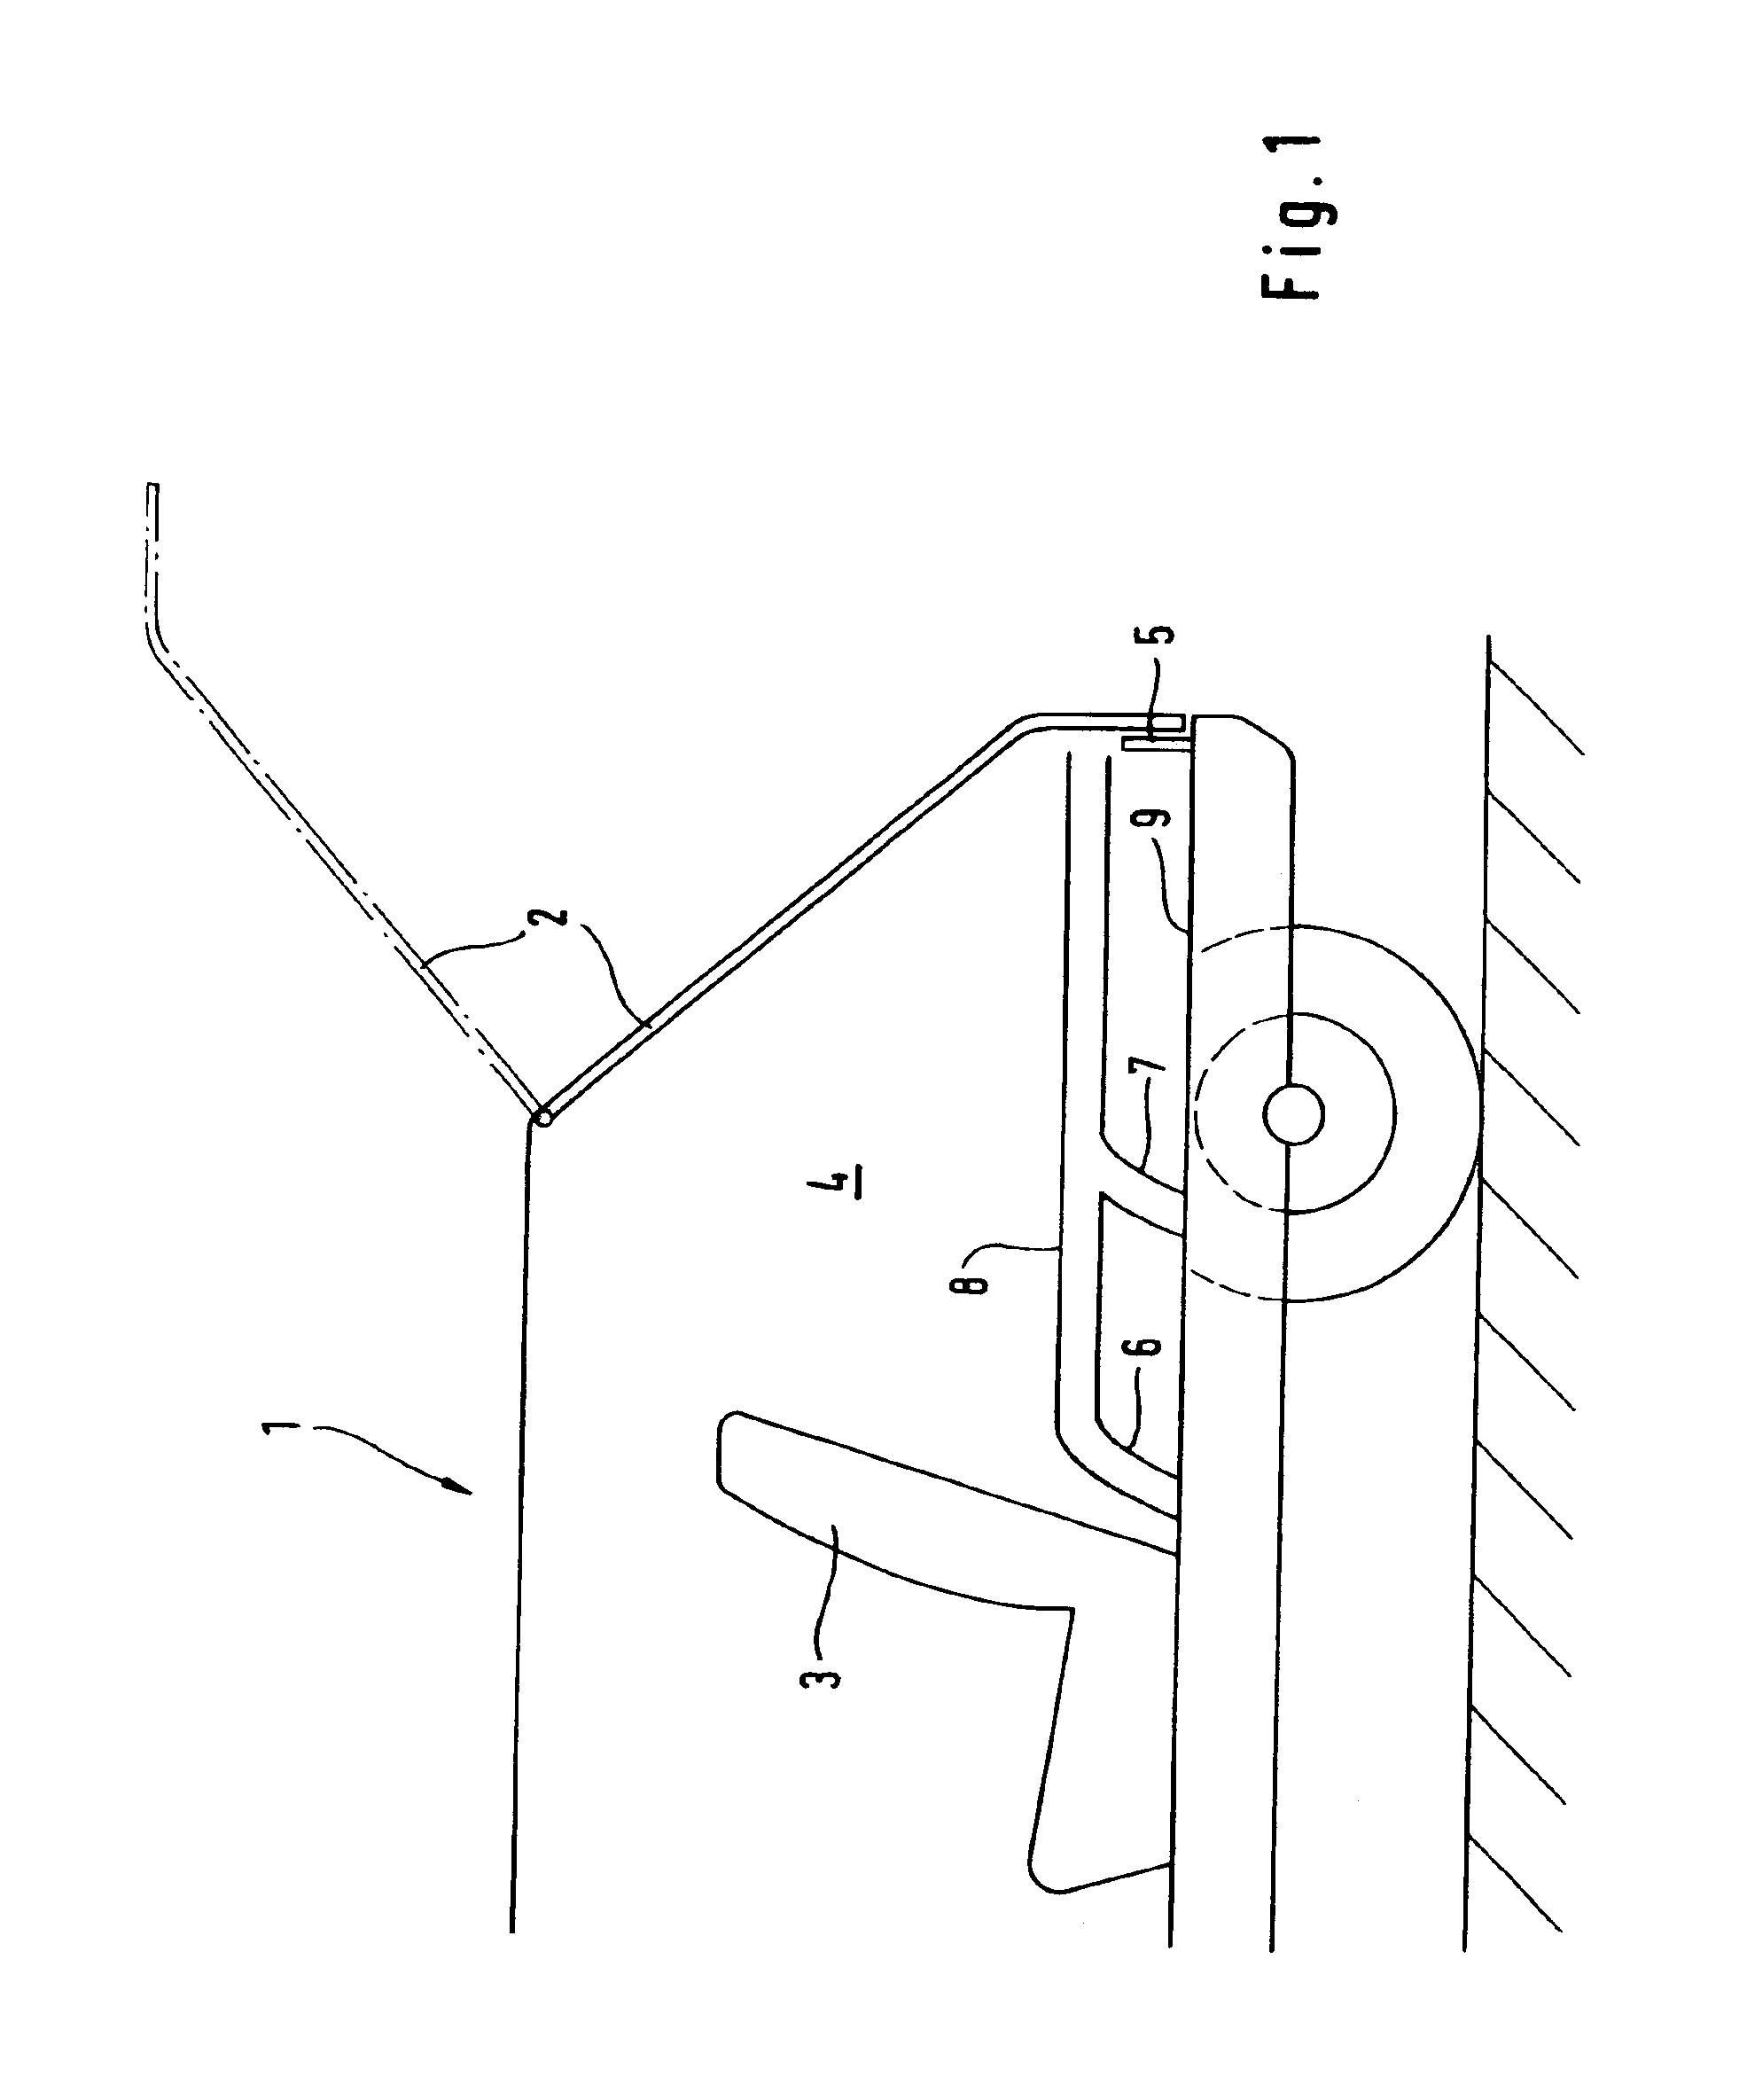 Loading floor for a vehicle and loading apparatus